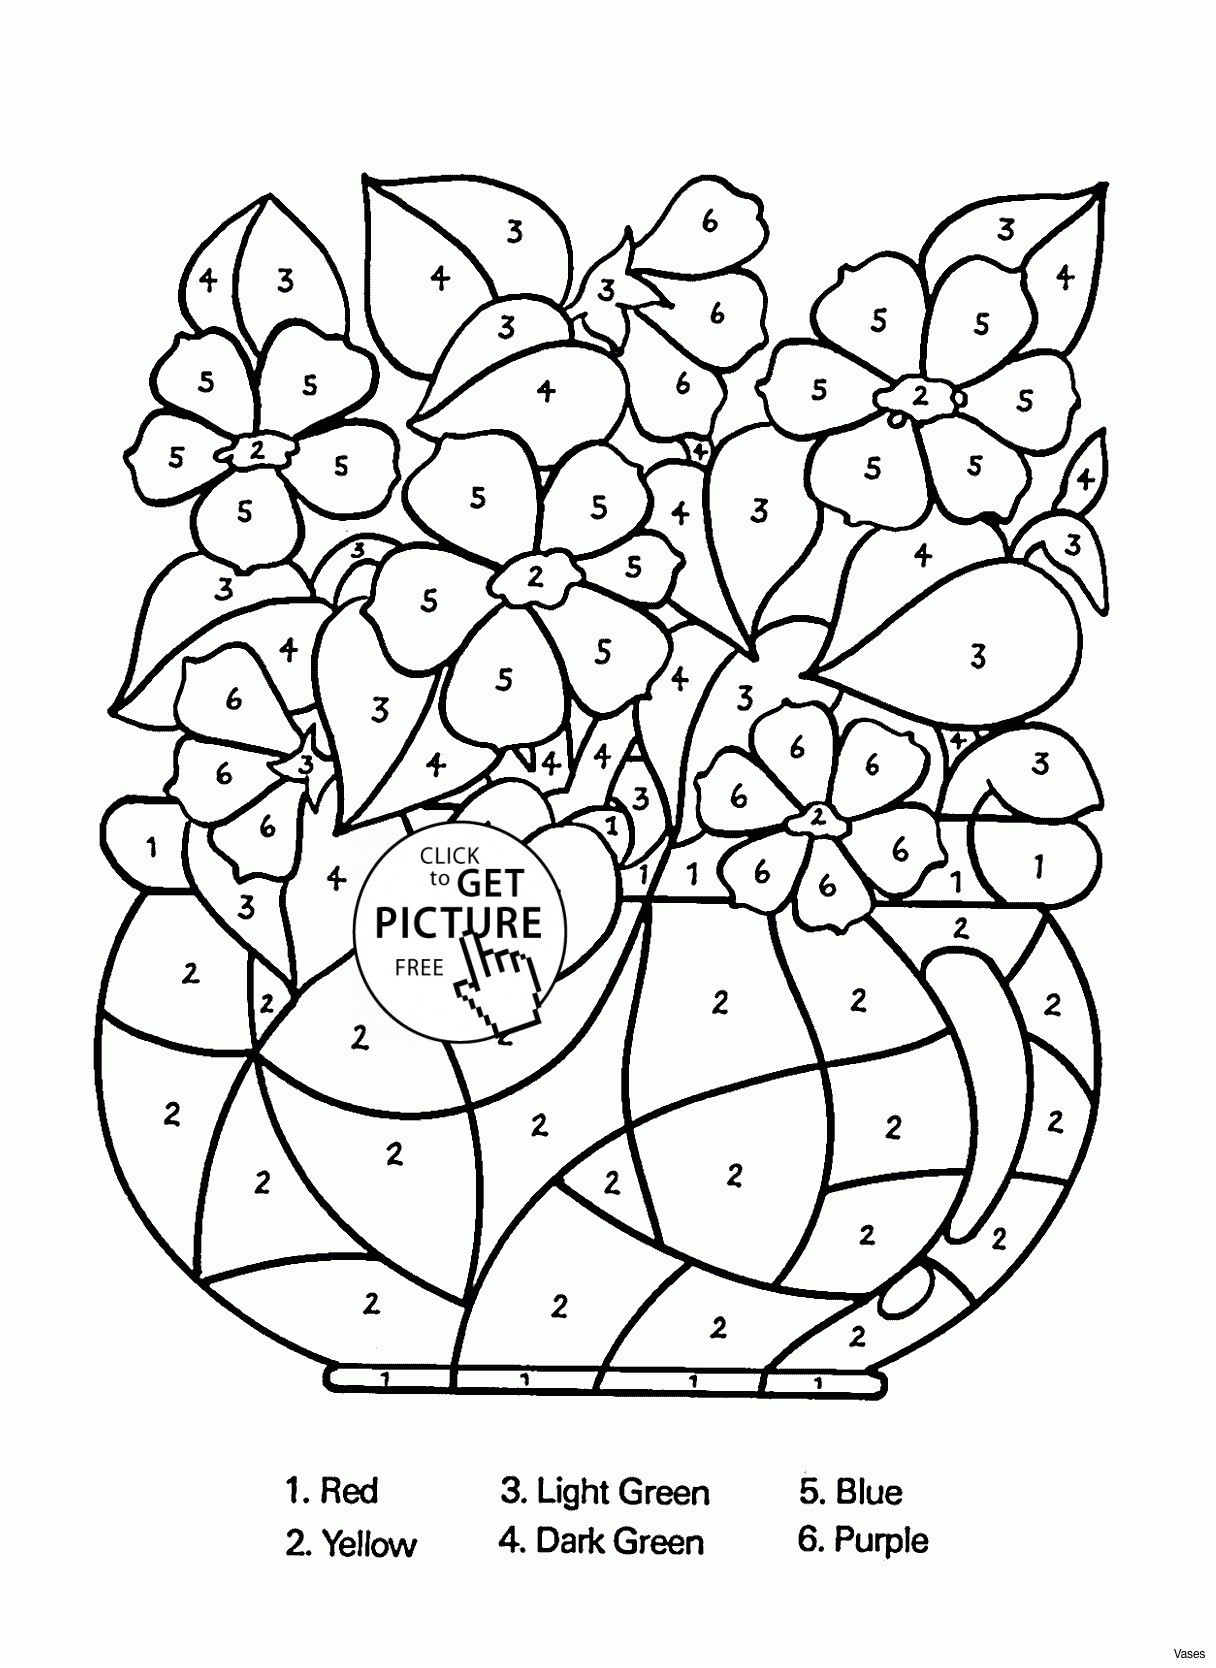 Van Gogh Flowers In A Blue Vase Of Van Gogh Coloring Pages Bestcoloringpages Me Intended for Van Gogh Coloring Pages 46 New Photograph Of Cool Coloring Books Oil Paintings